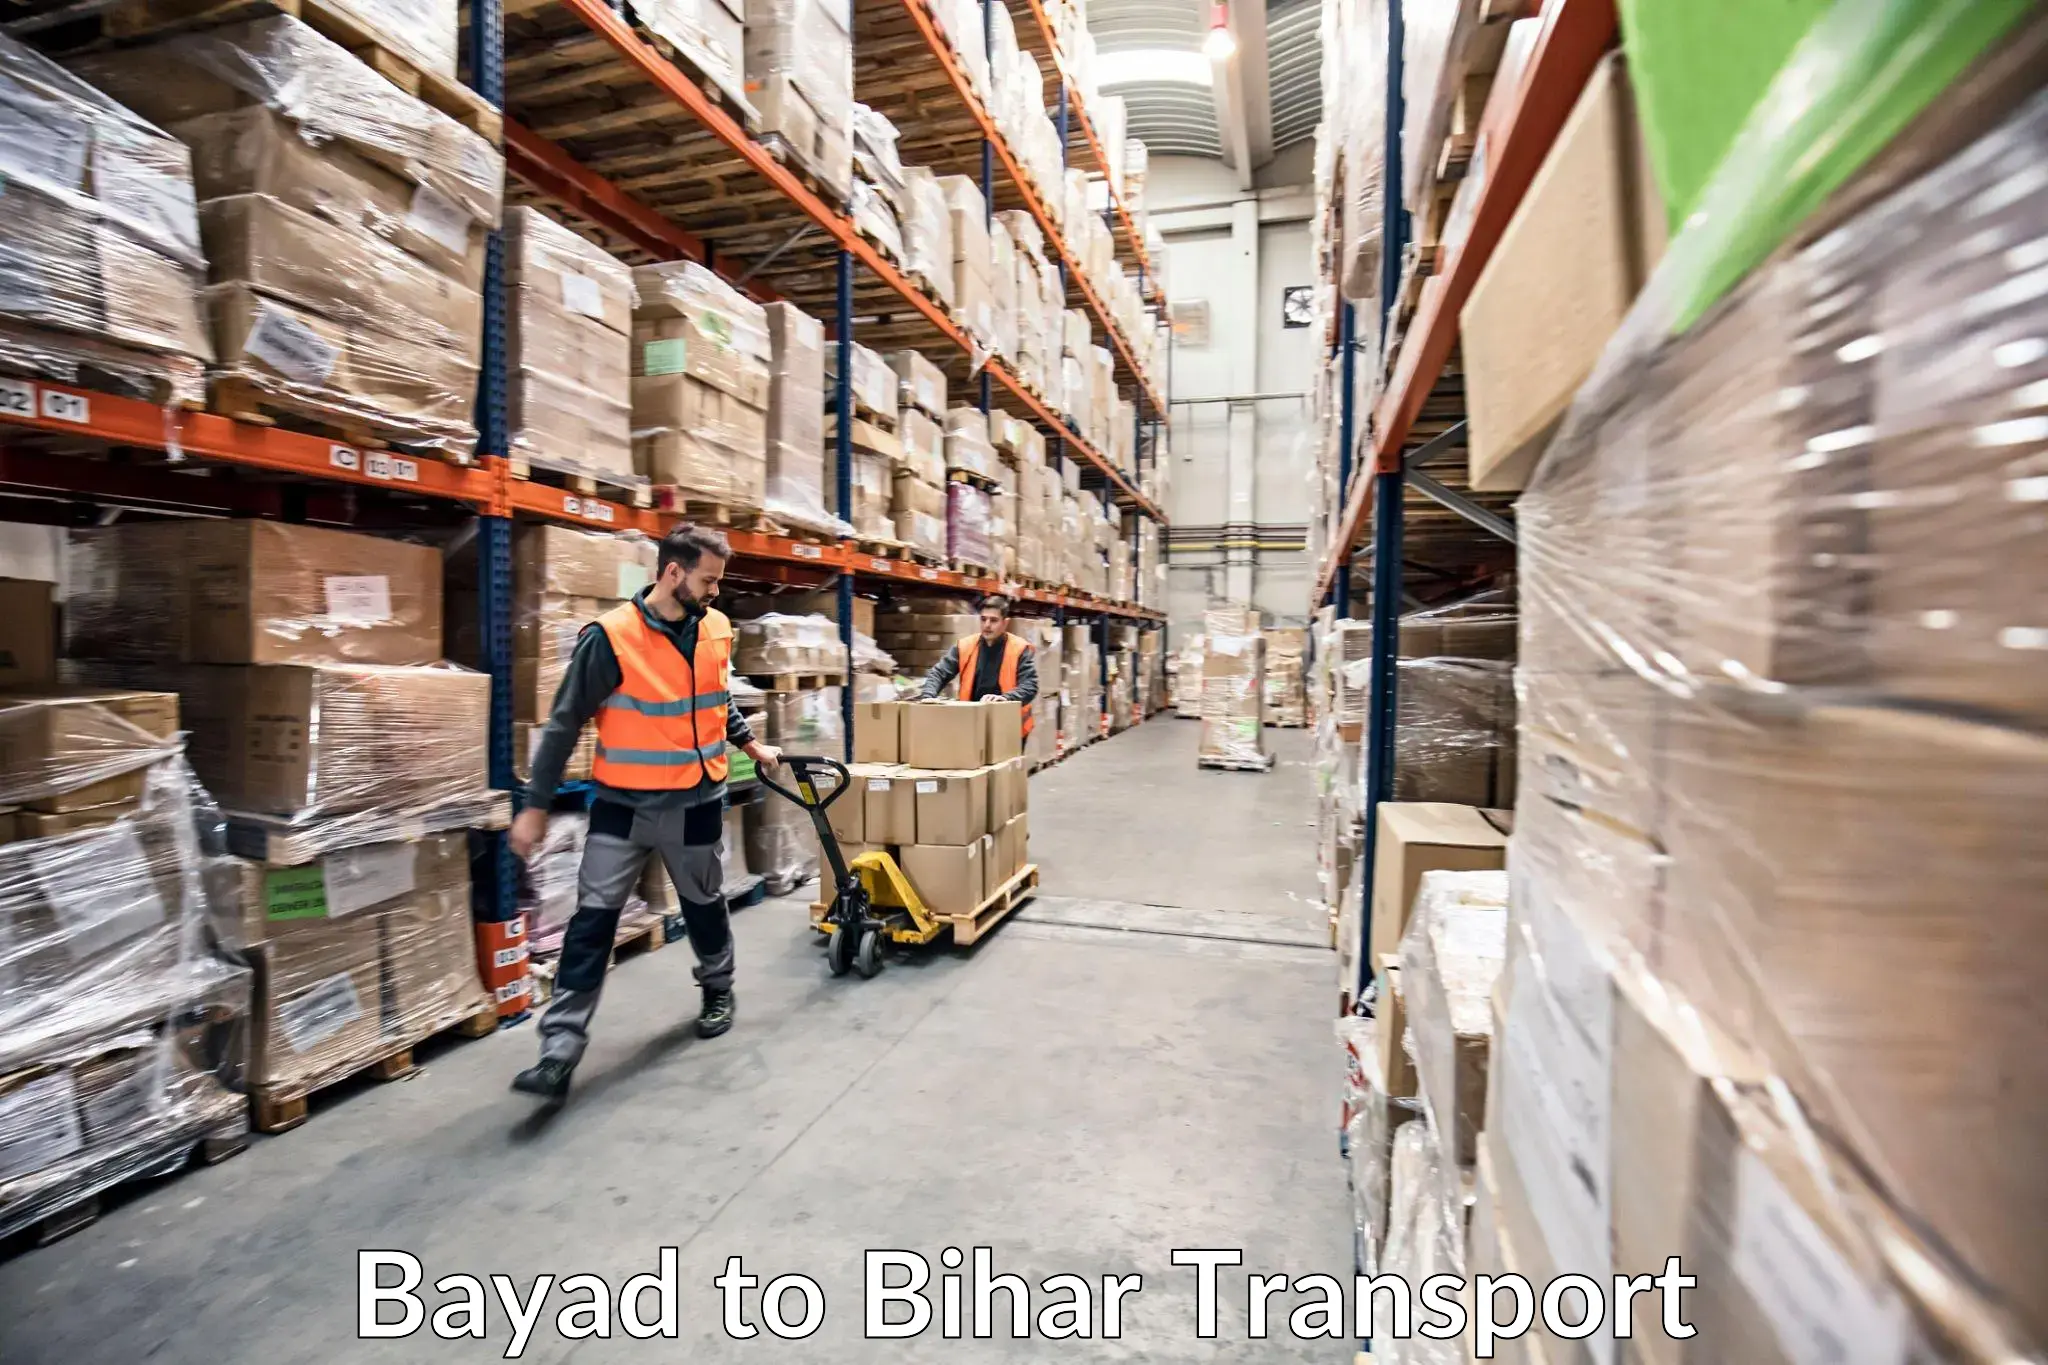 Air freight transport services Bayad to Buxar